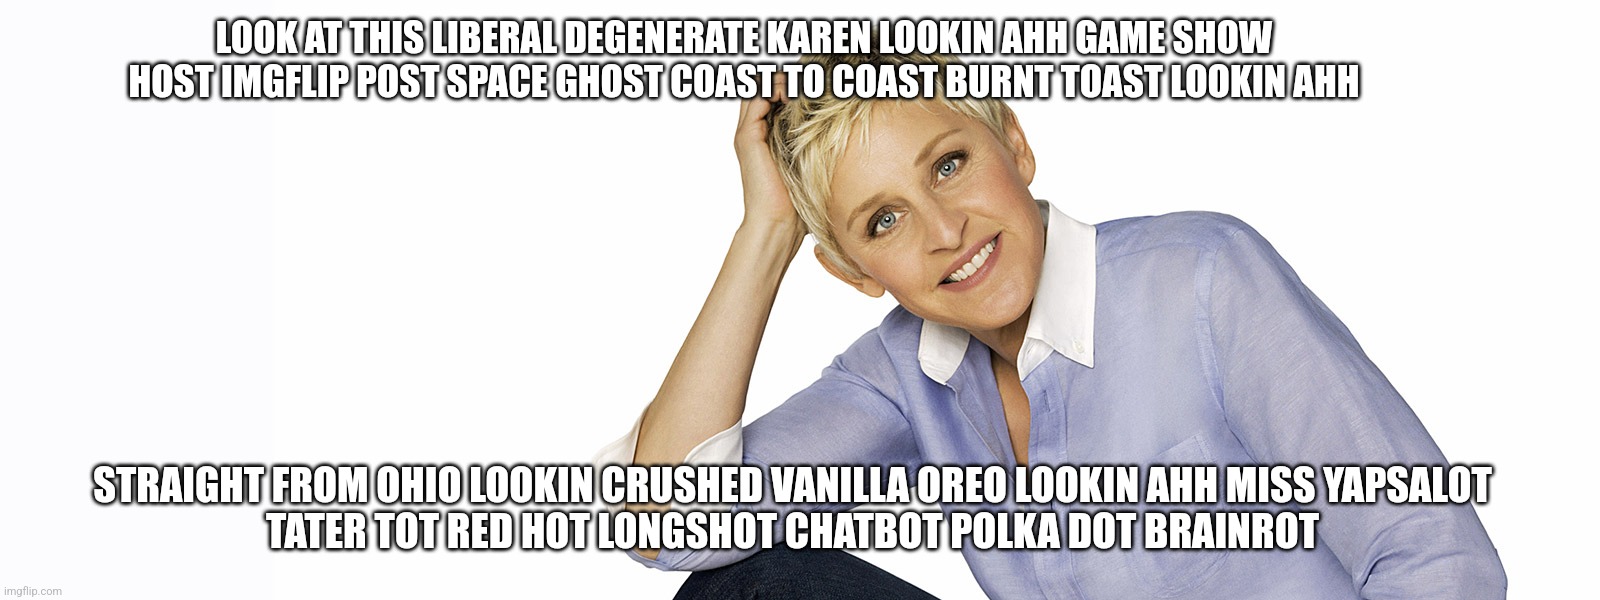 Roasting Ellen the Degenerate | LOOK AT THIS LIBERAL DEGENERATE KAREN LOOKIN AHH GAME SHOW HOST IMGFLIP POST SPACE GHOST COAST TO COAST BURNT TOAST LOOKIN AHH; STRAIGHT FROM OHIO LOOKIN CRUSHED VANILLA OREO LOOKIN AHH MISS YAPSALOT
TATER TOT RED HOT LONGSHOT CHATBOT POLKA DOT BRAINROT | image tagged in ellen the degenerate | made w/ Imgflip meme maker